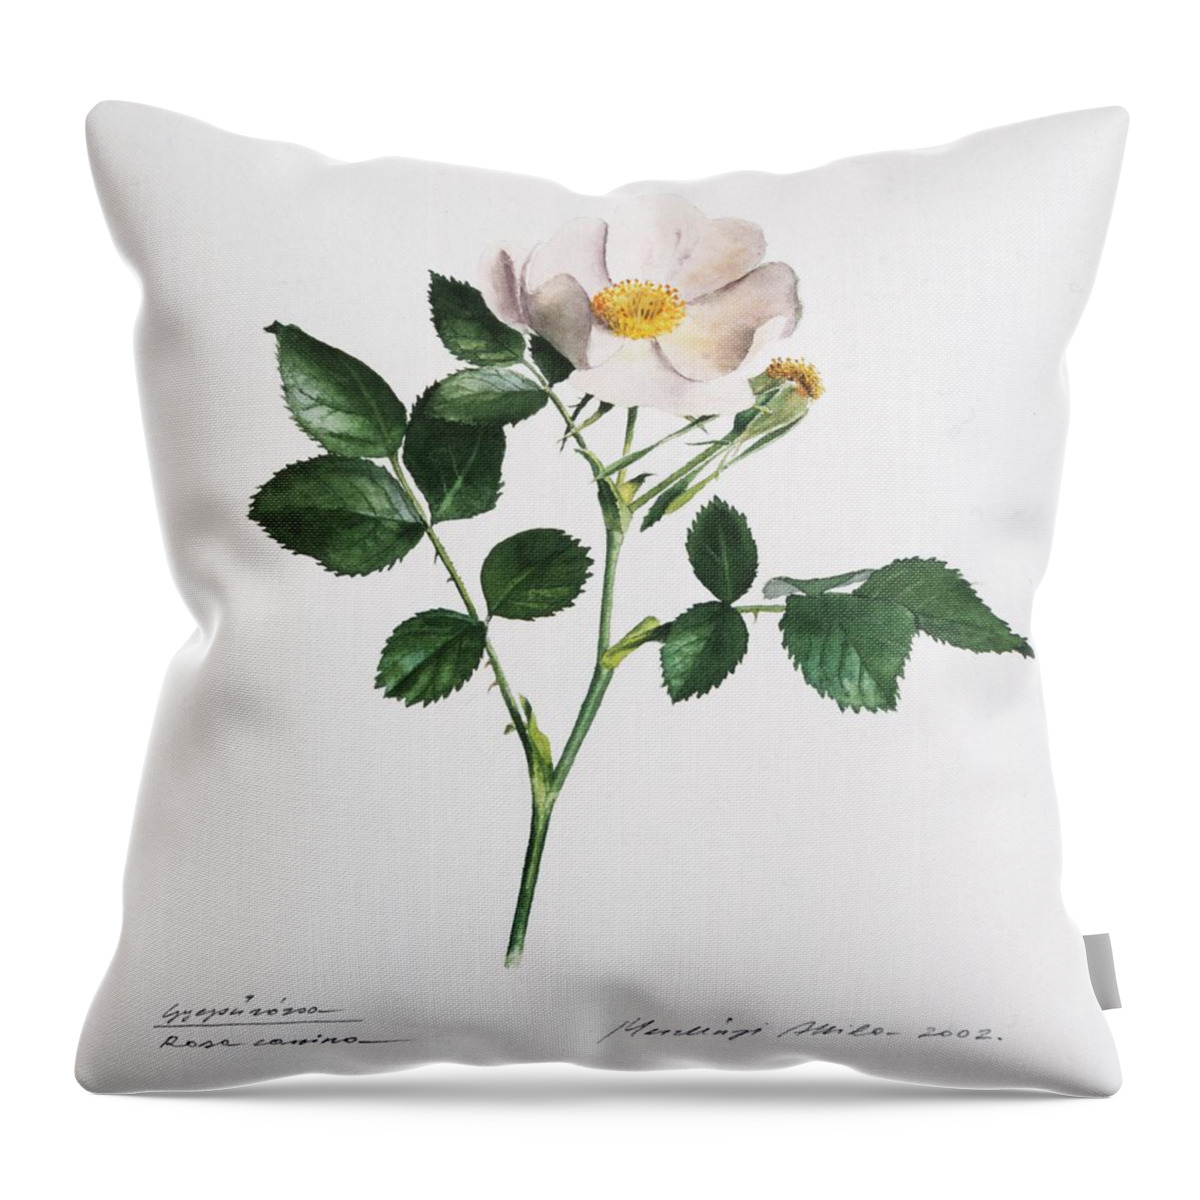 Dog Rose Throw Pillow featuring the painting Wild Rose by Attila Meszlenyi